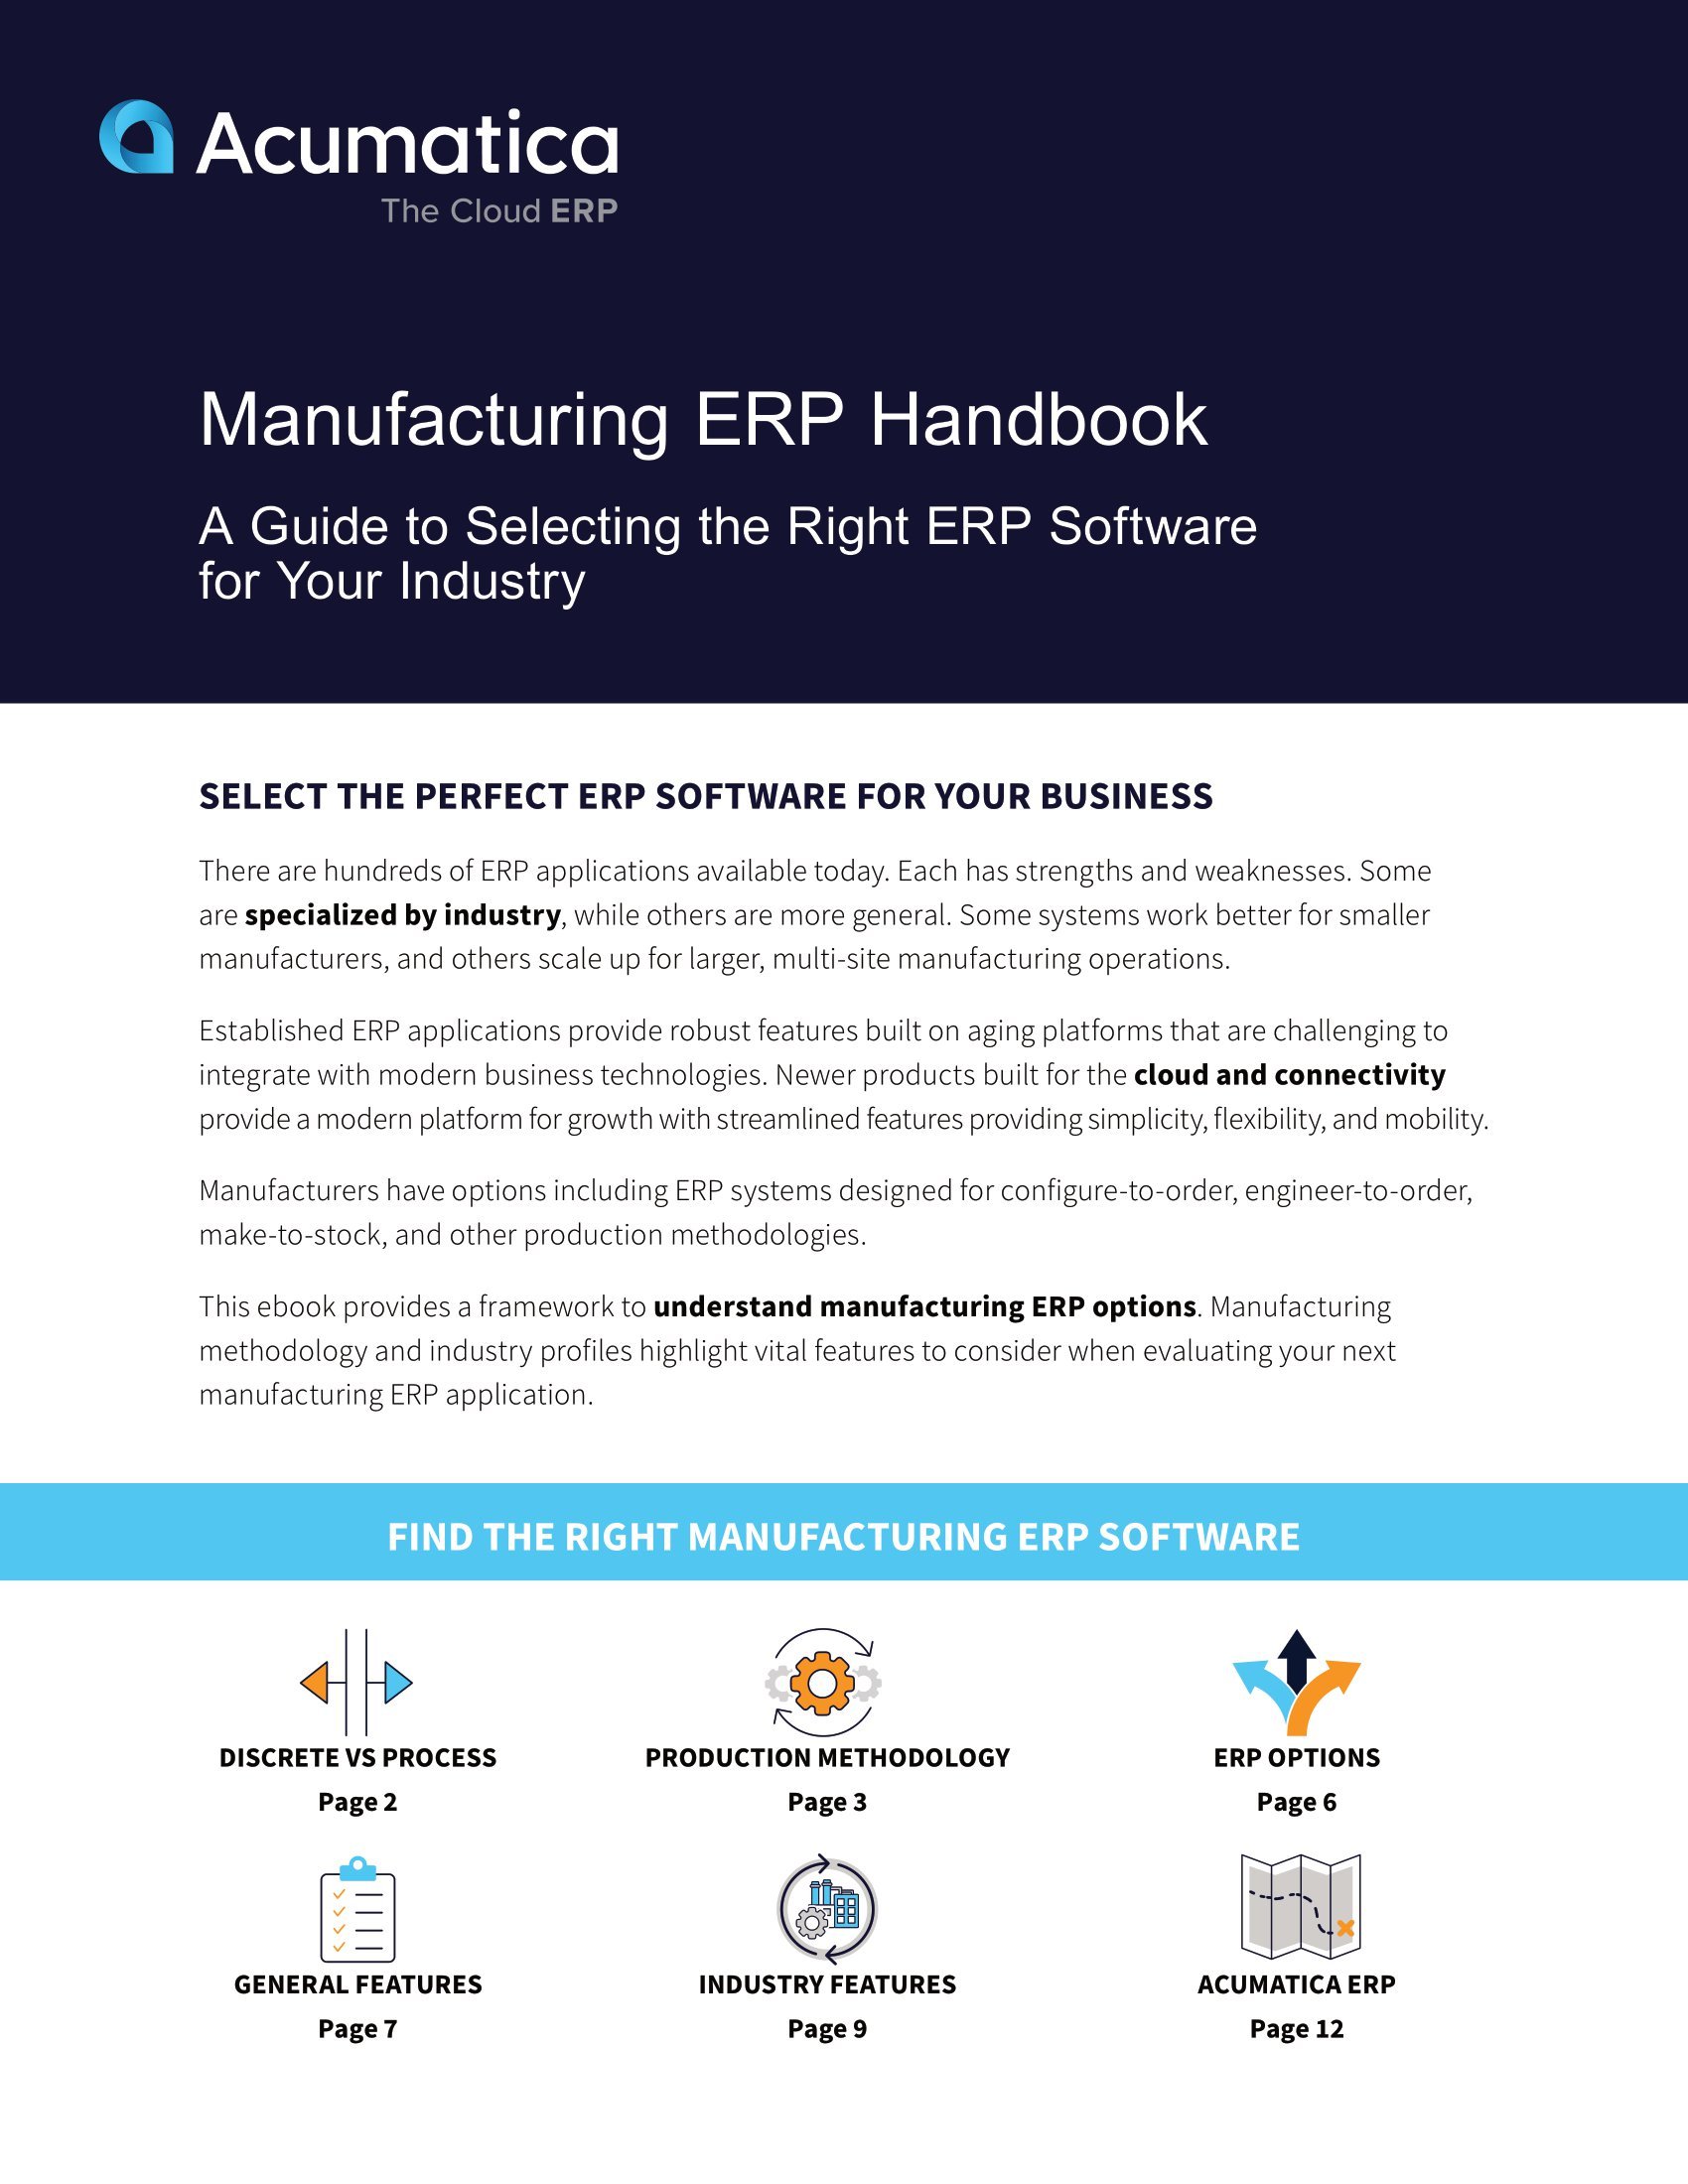 The Manufacturing ERP Guide